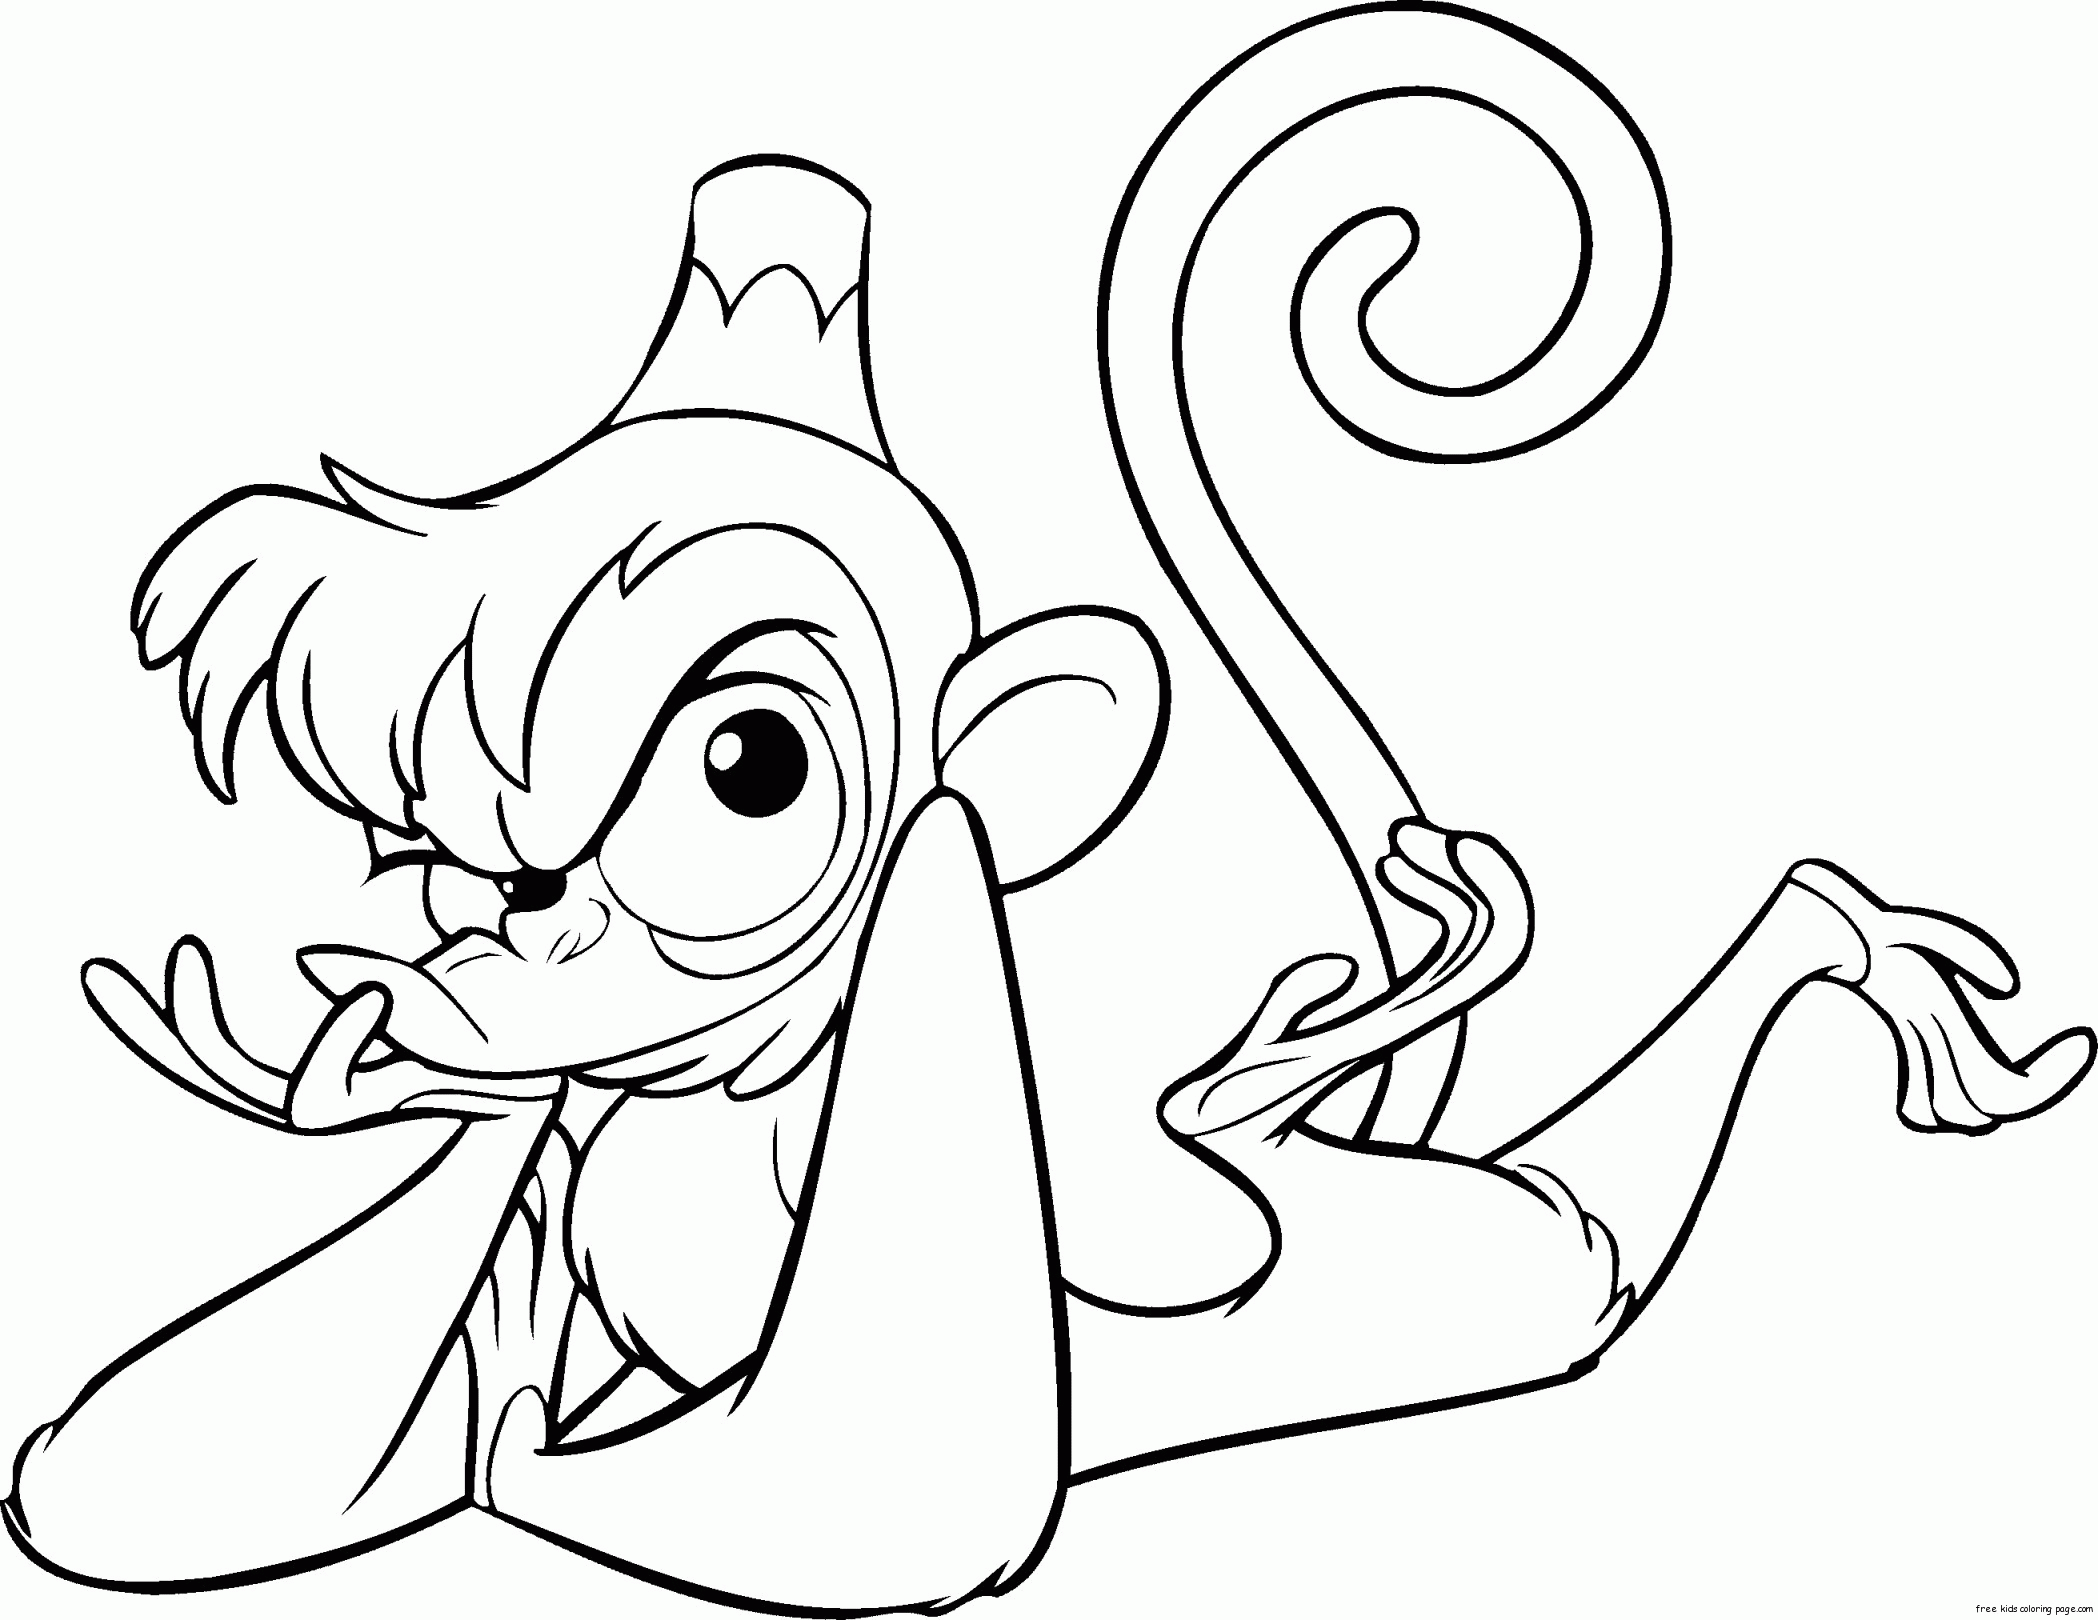 Disney Cartoon Coloring Pages Printable - High Quality Coloring Pages